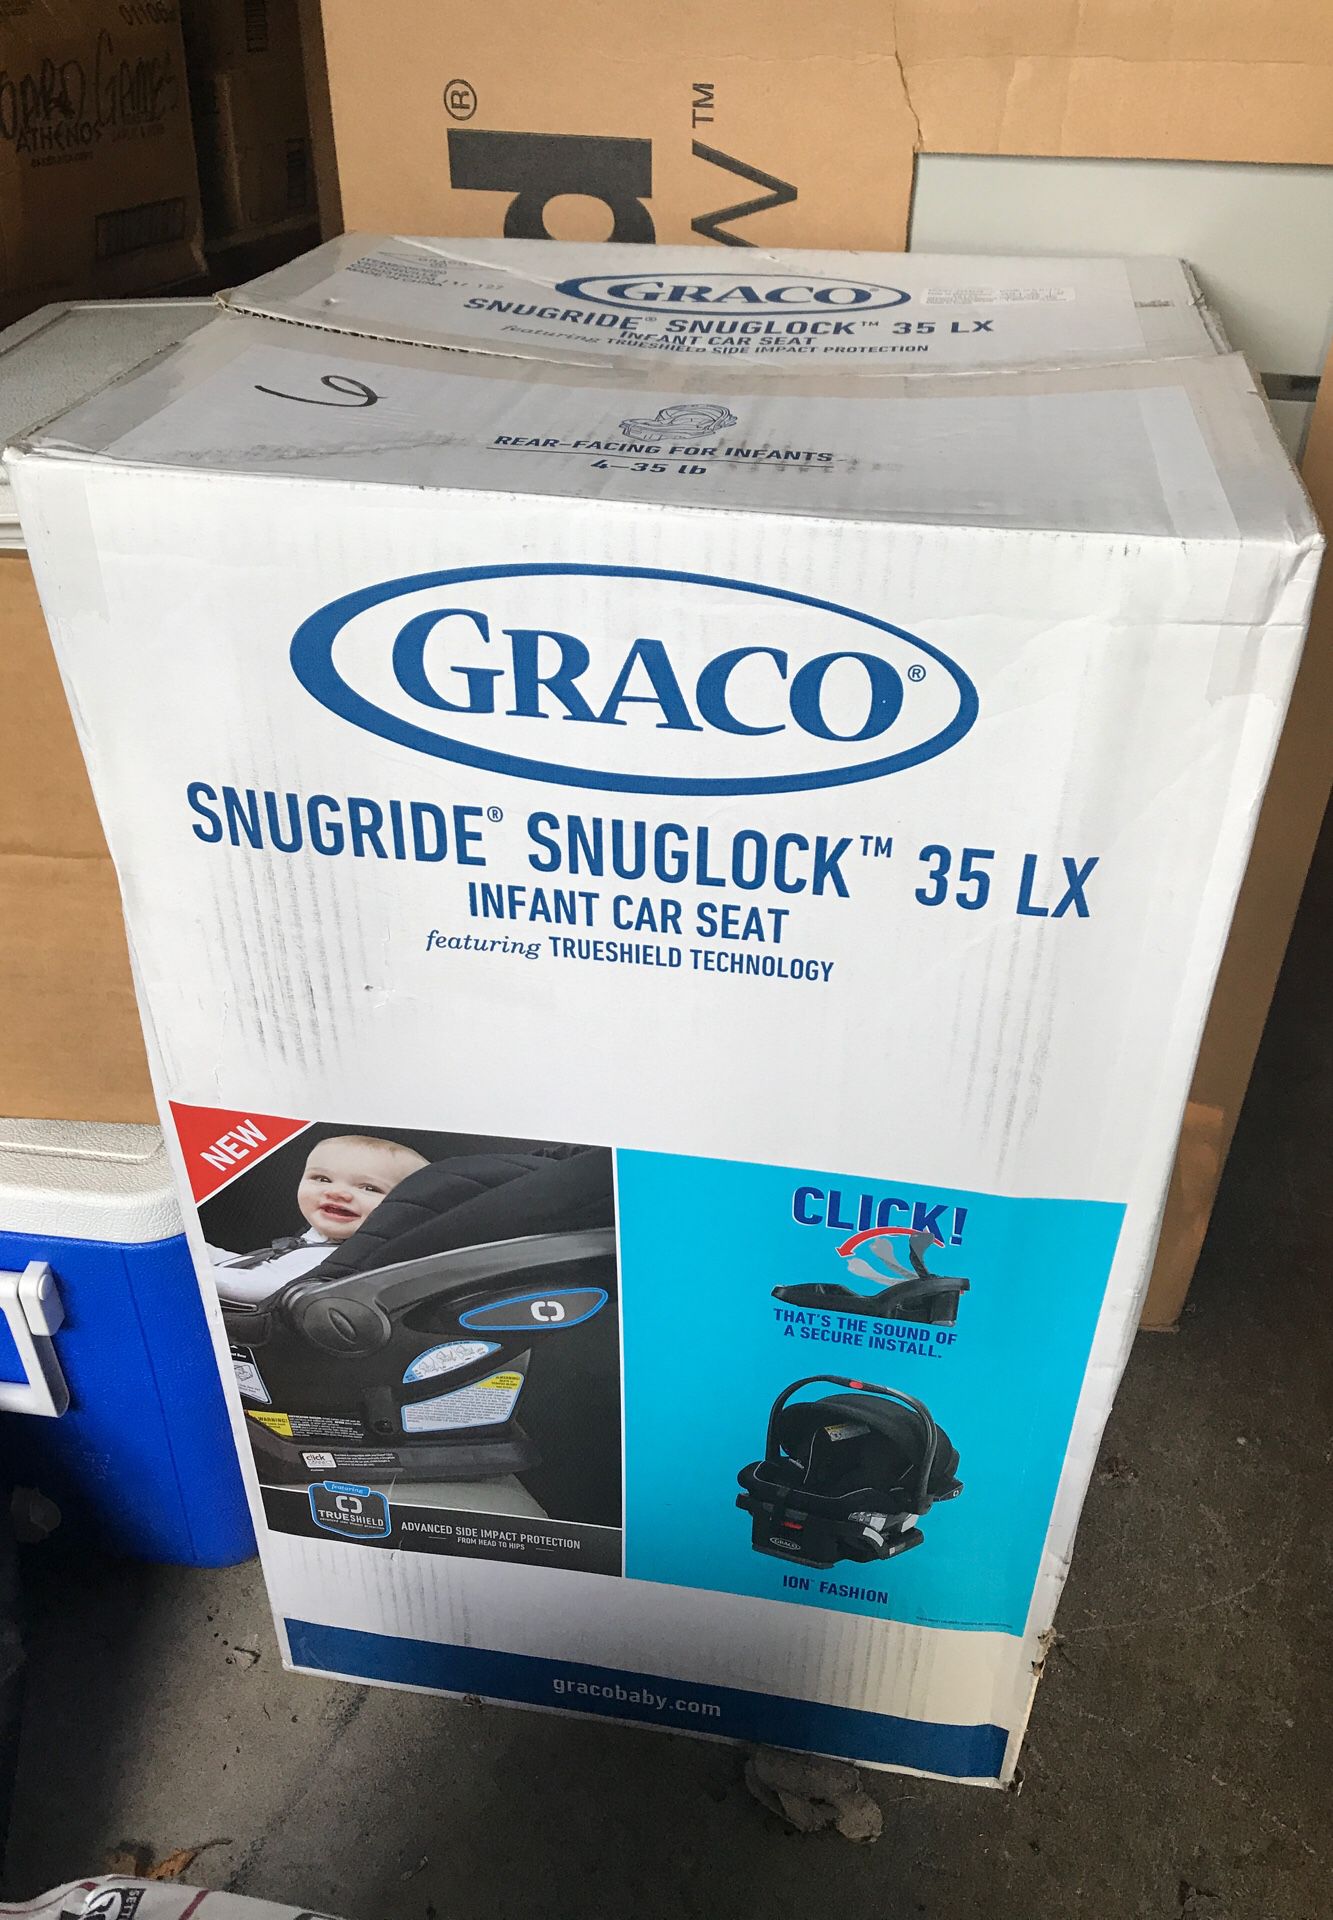 Brand New Graco Snugride Snuglock 35LX Infant Car Seat ***COMES WITH FREE SEAT PROTECTOR***